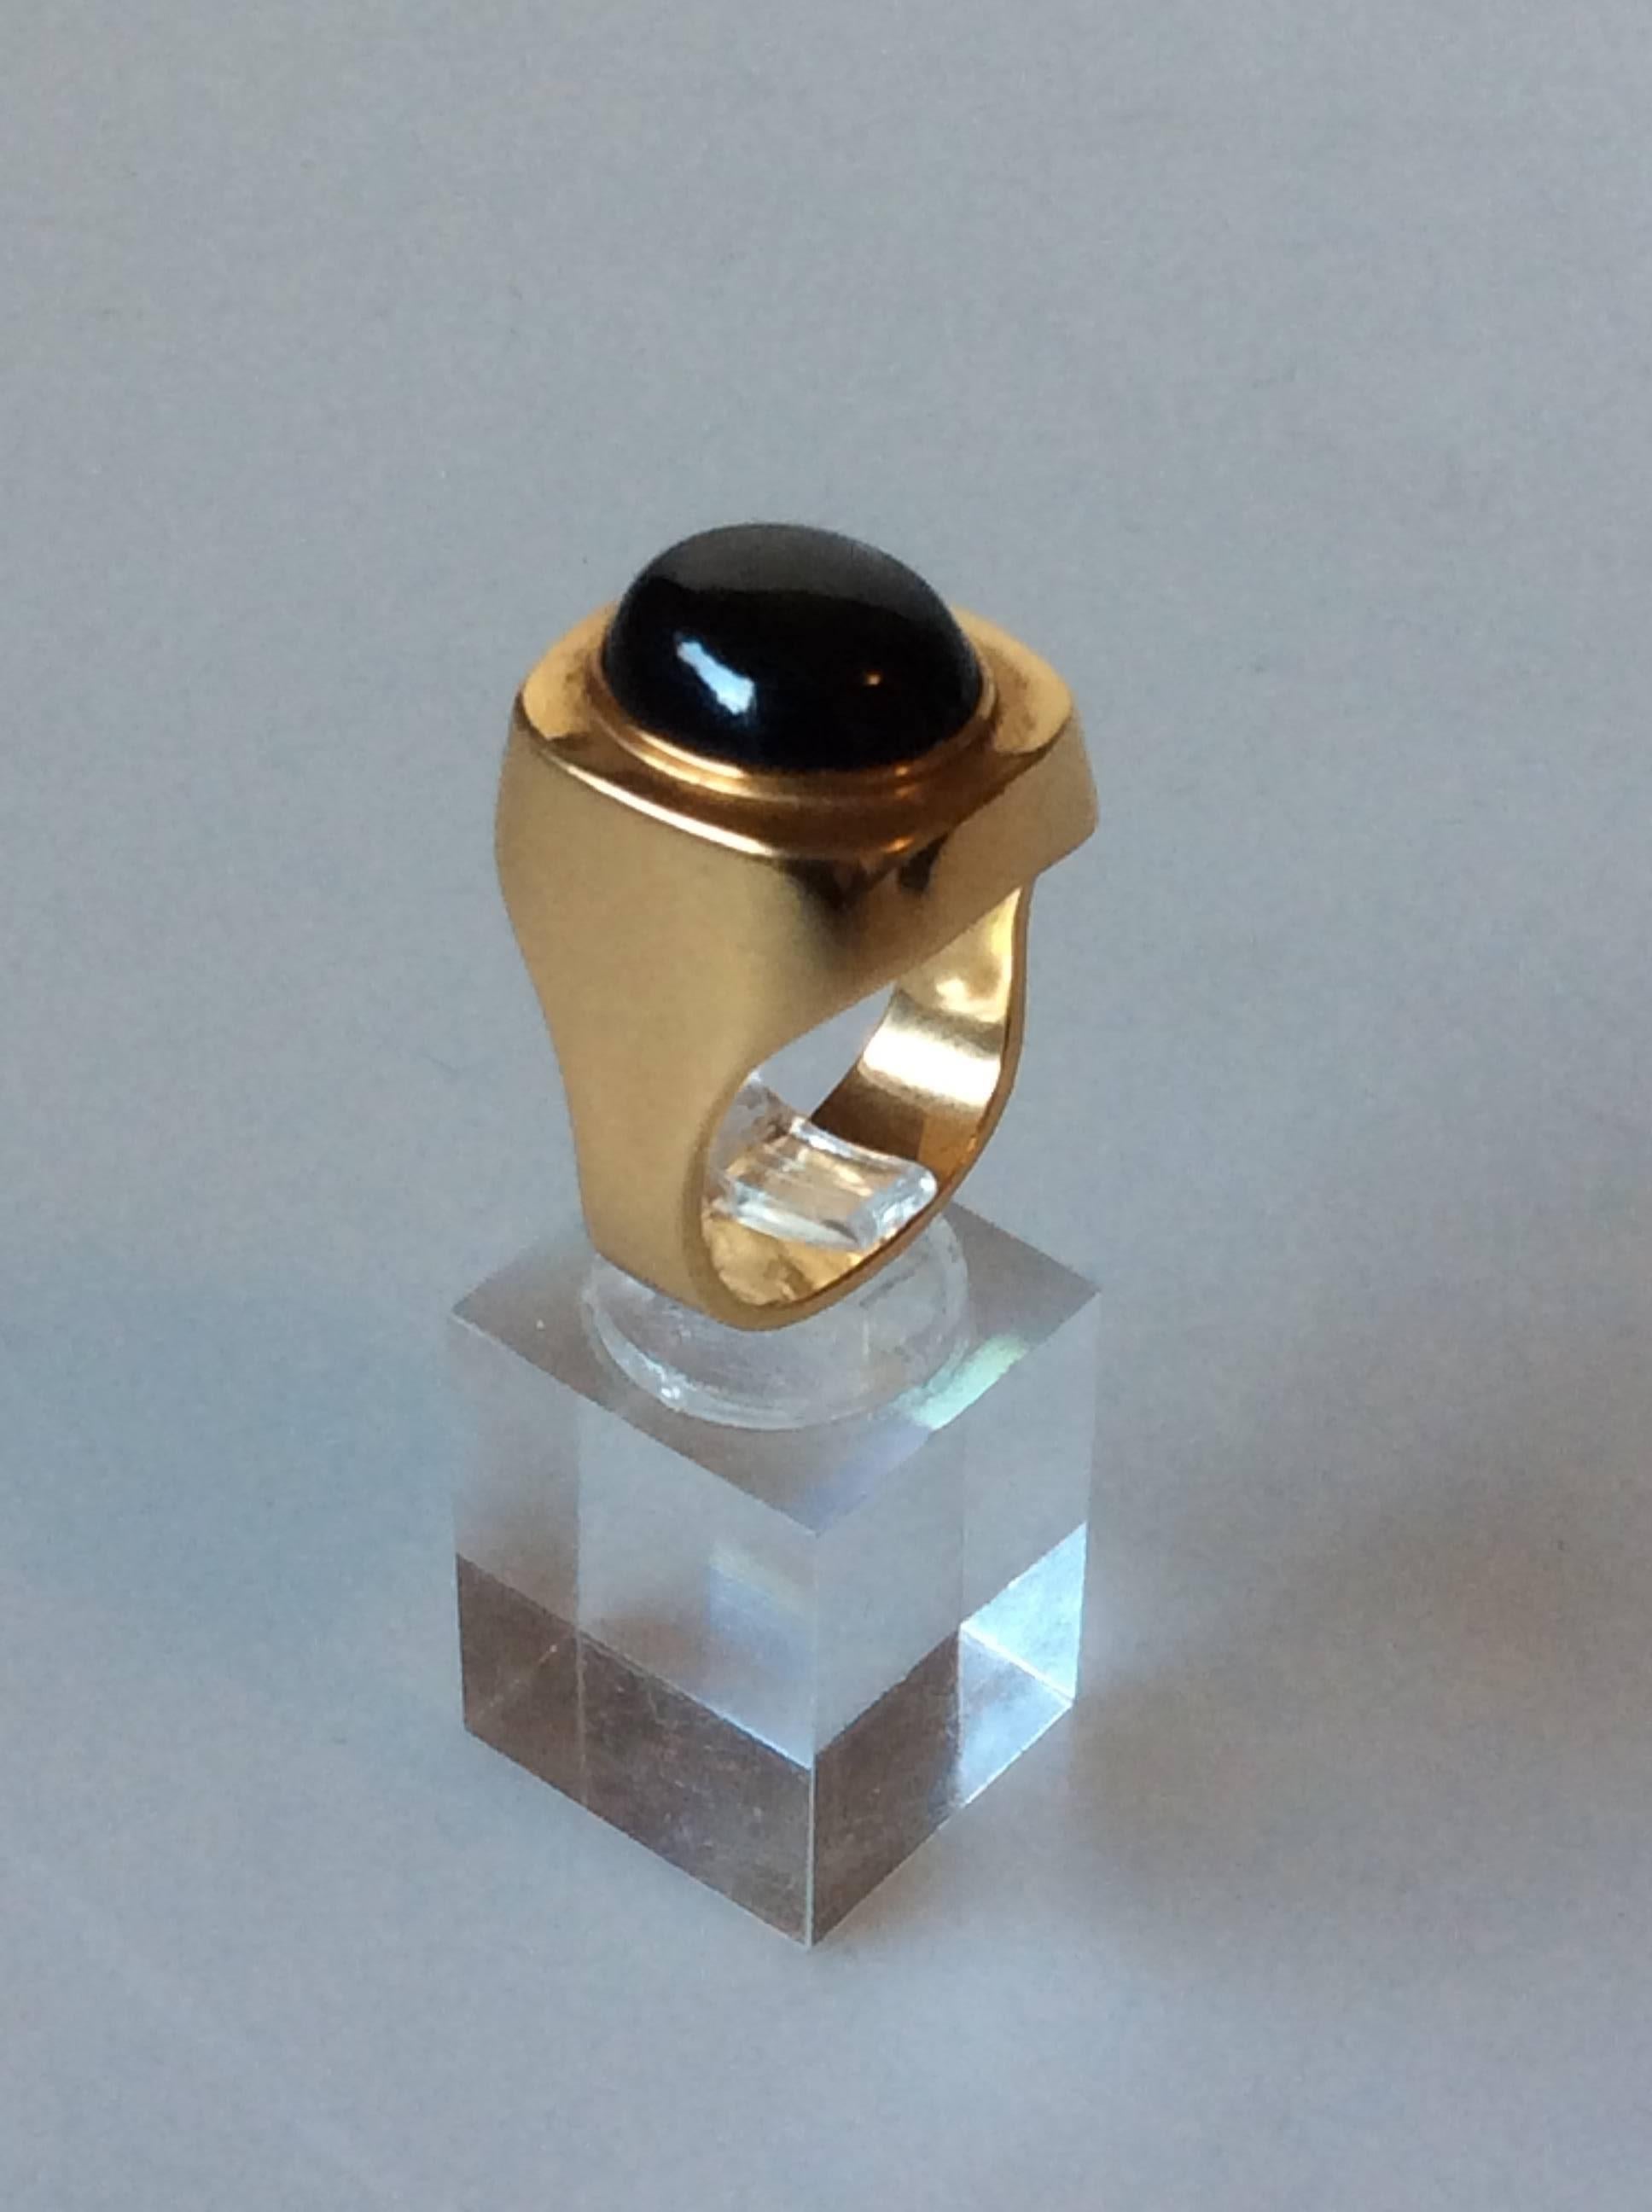 Georg Jensen 18K Gold ring with cabochon star sapphire.

Ring size 61 or US 9 1/2